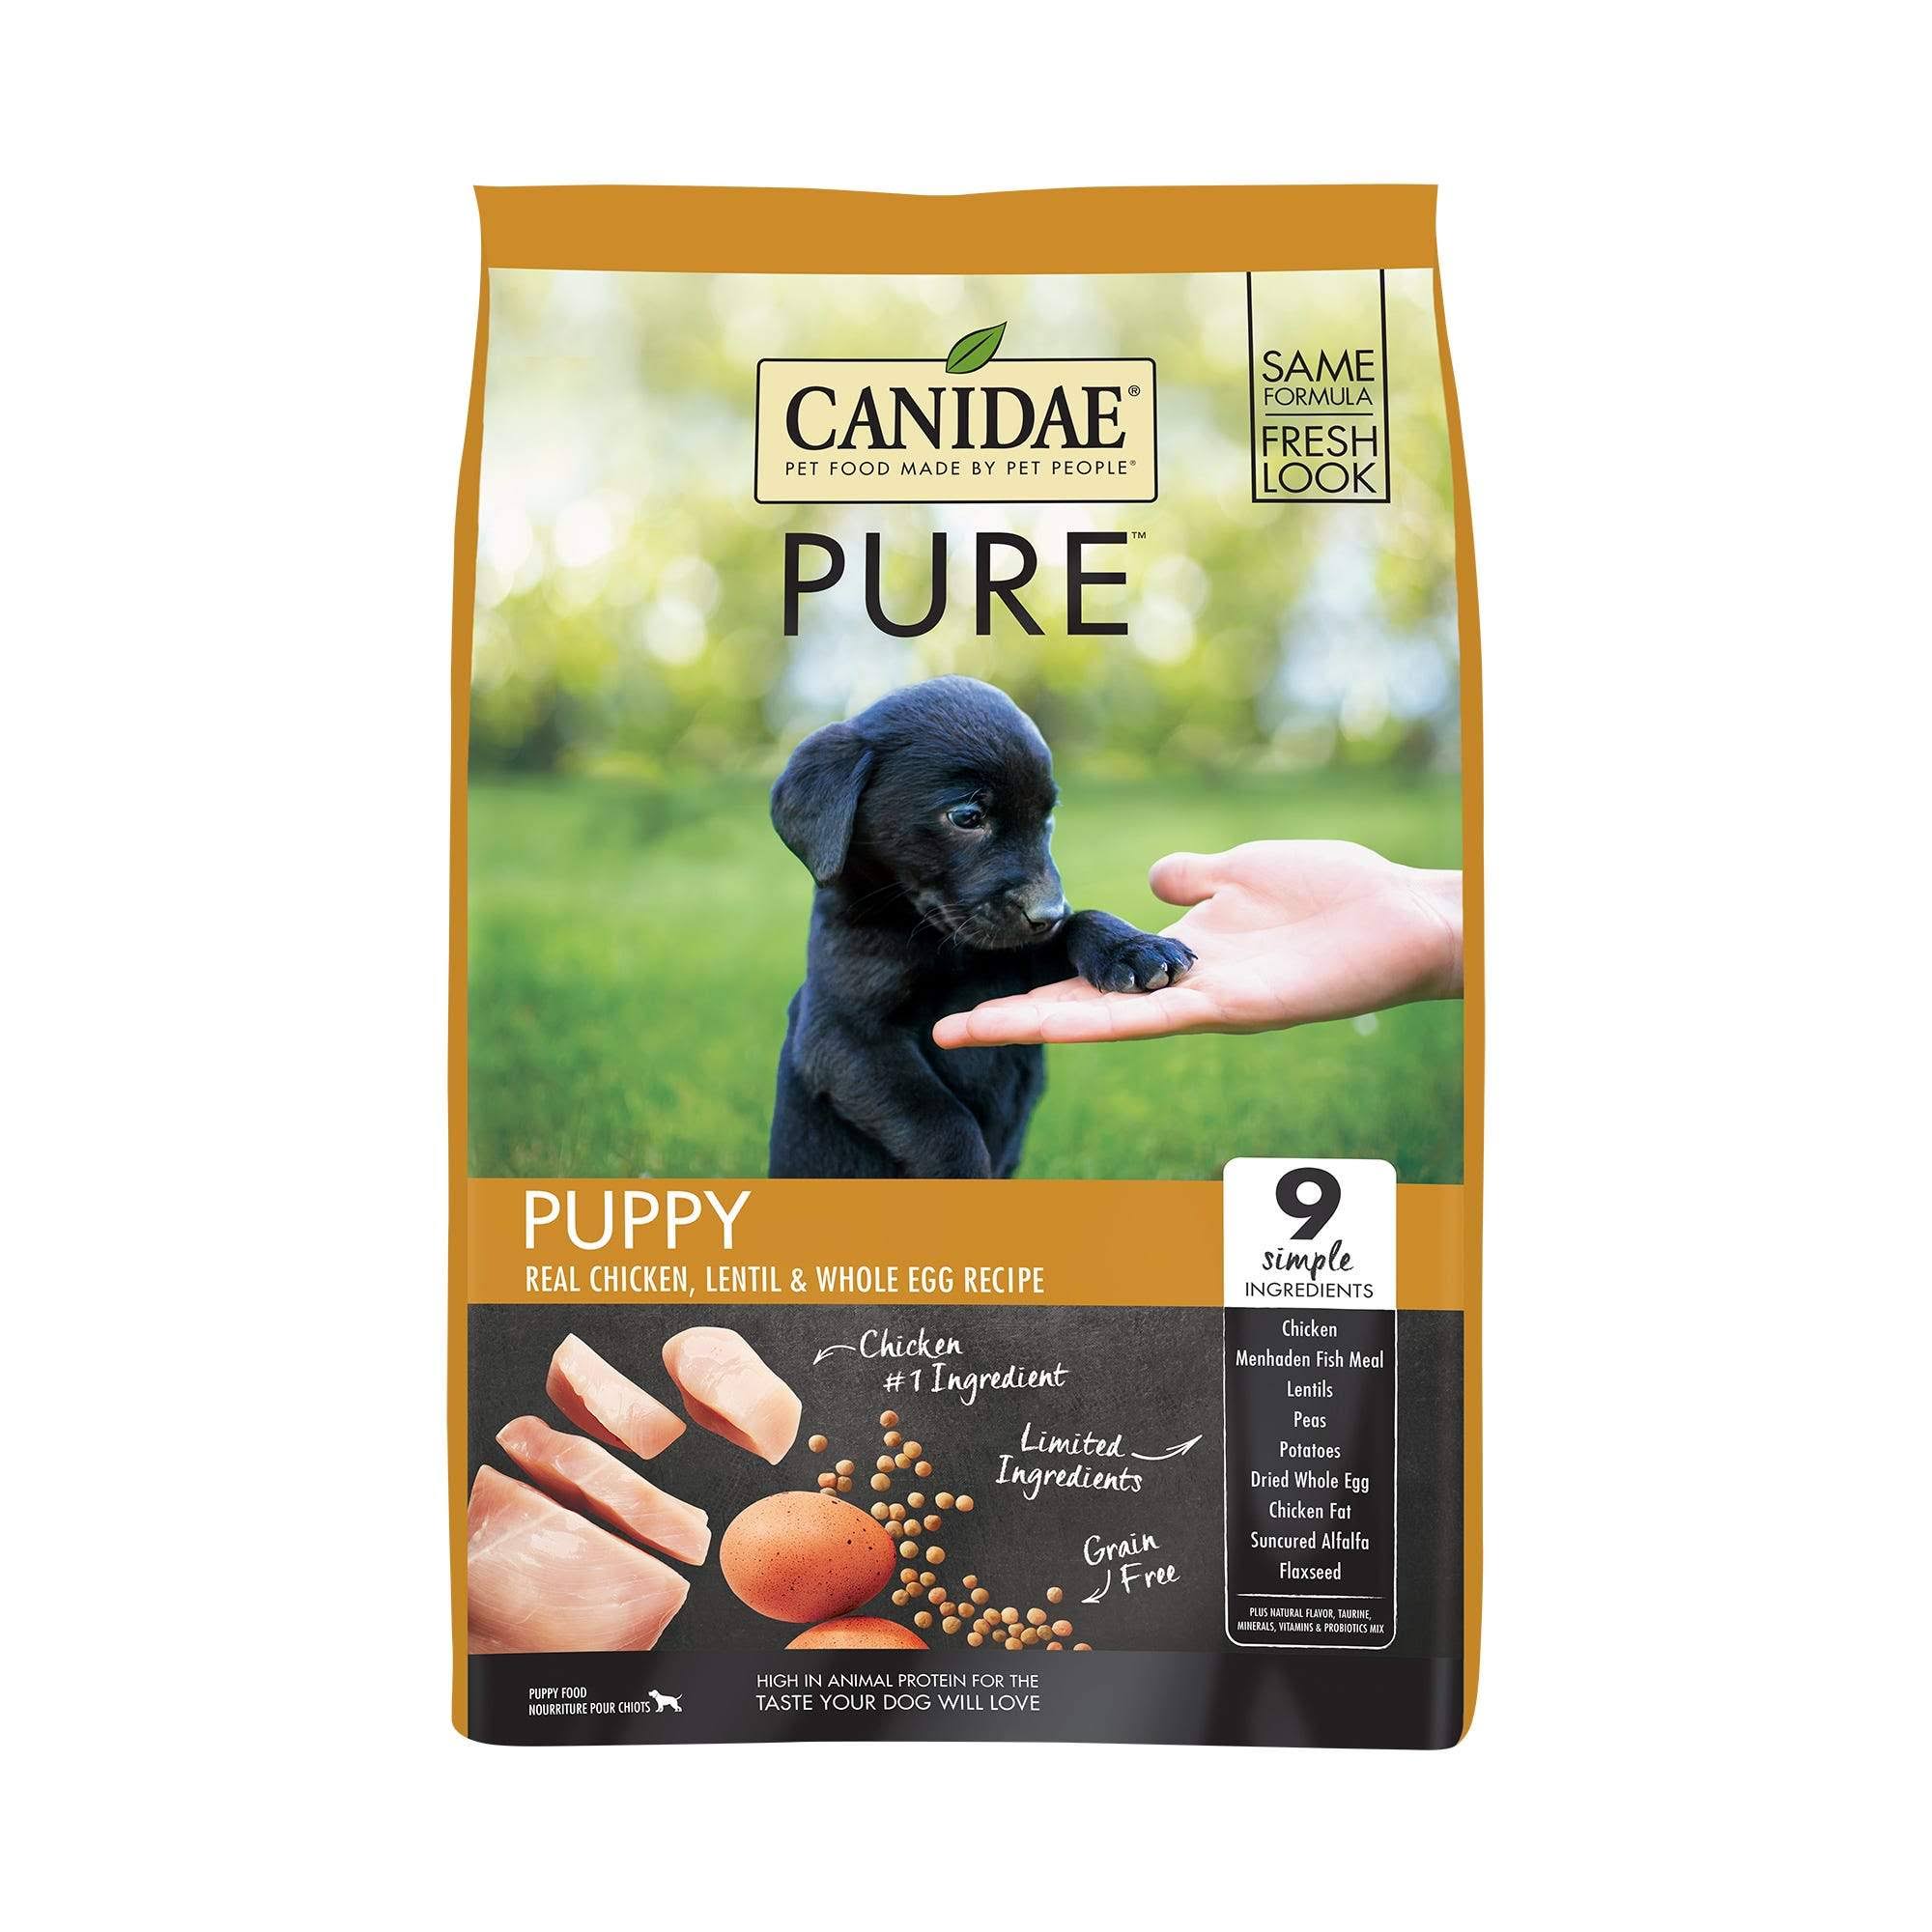 Canidae Grain Free Pure Dry Dog Food - Fresh Chicken for Puppies, 24lbs